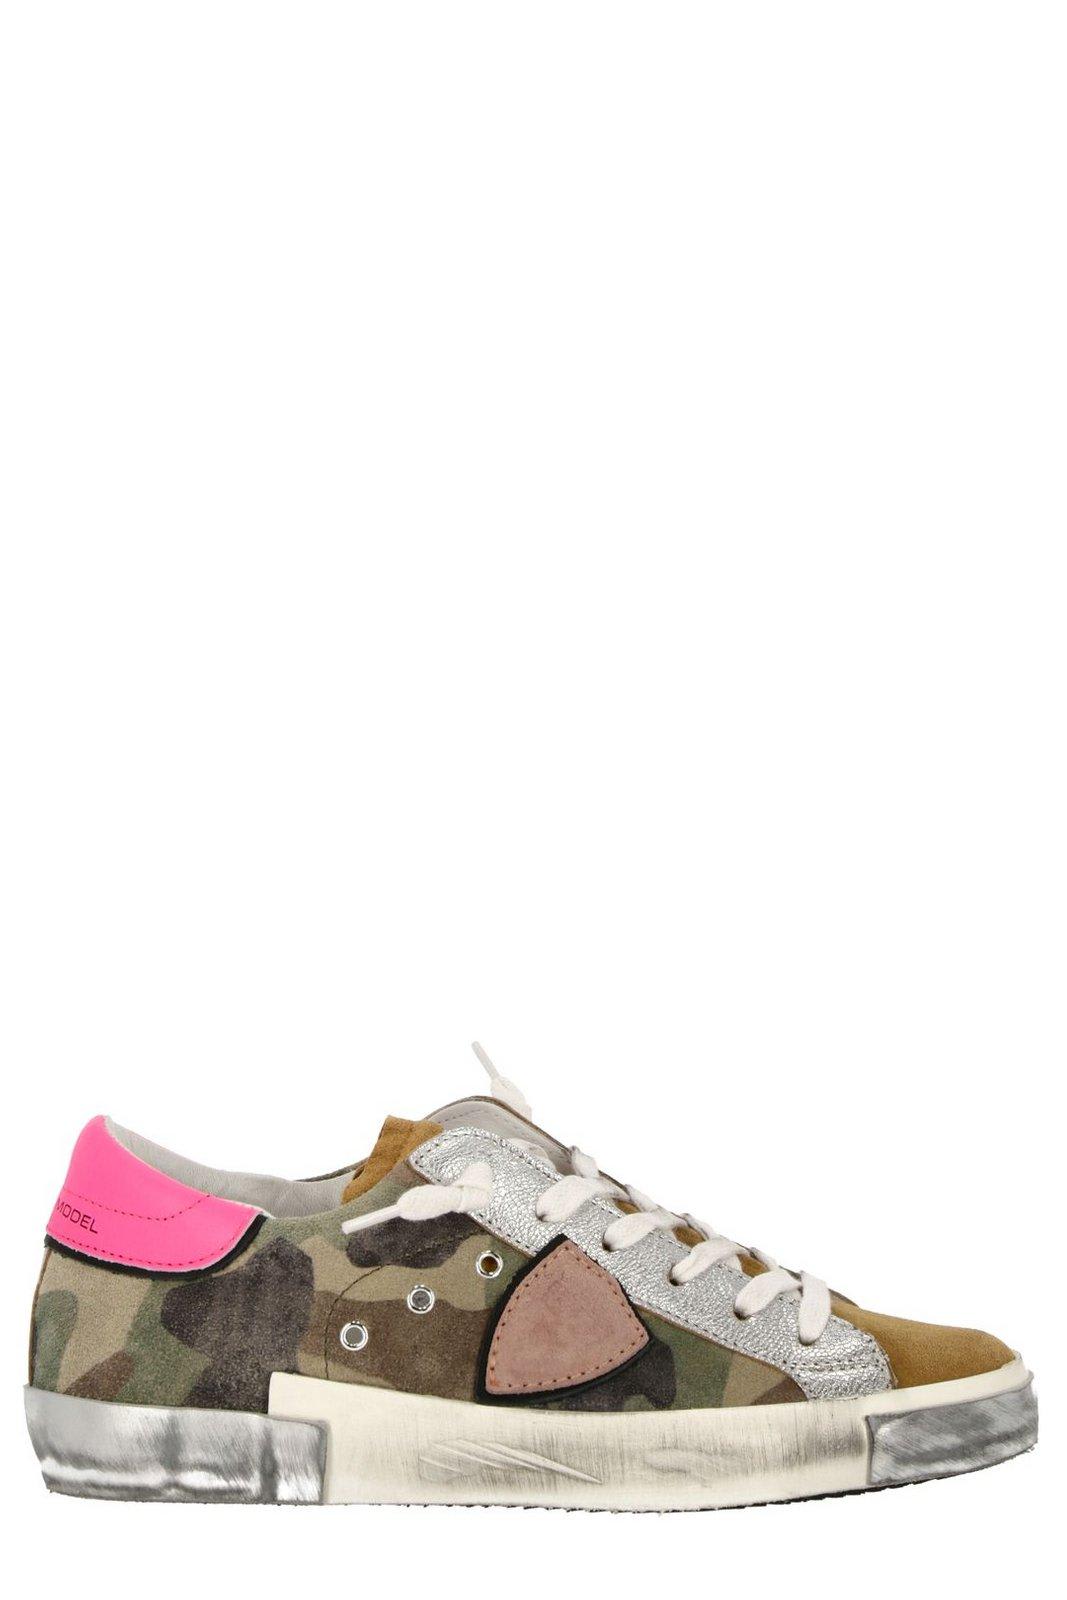 PHILIPPE MODEL PRSX MILITAIRE SNEAKERS